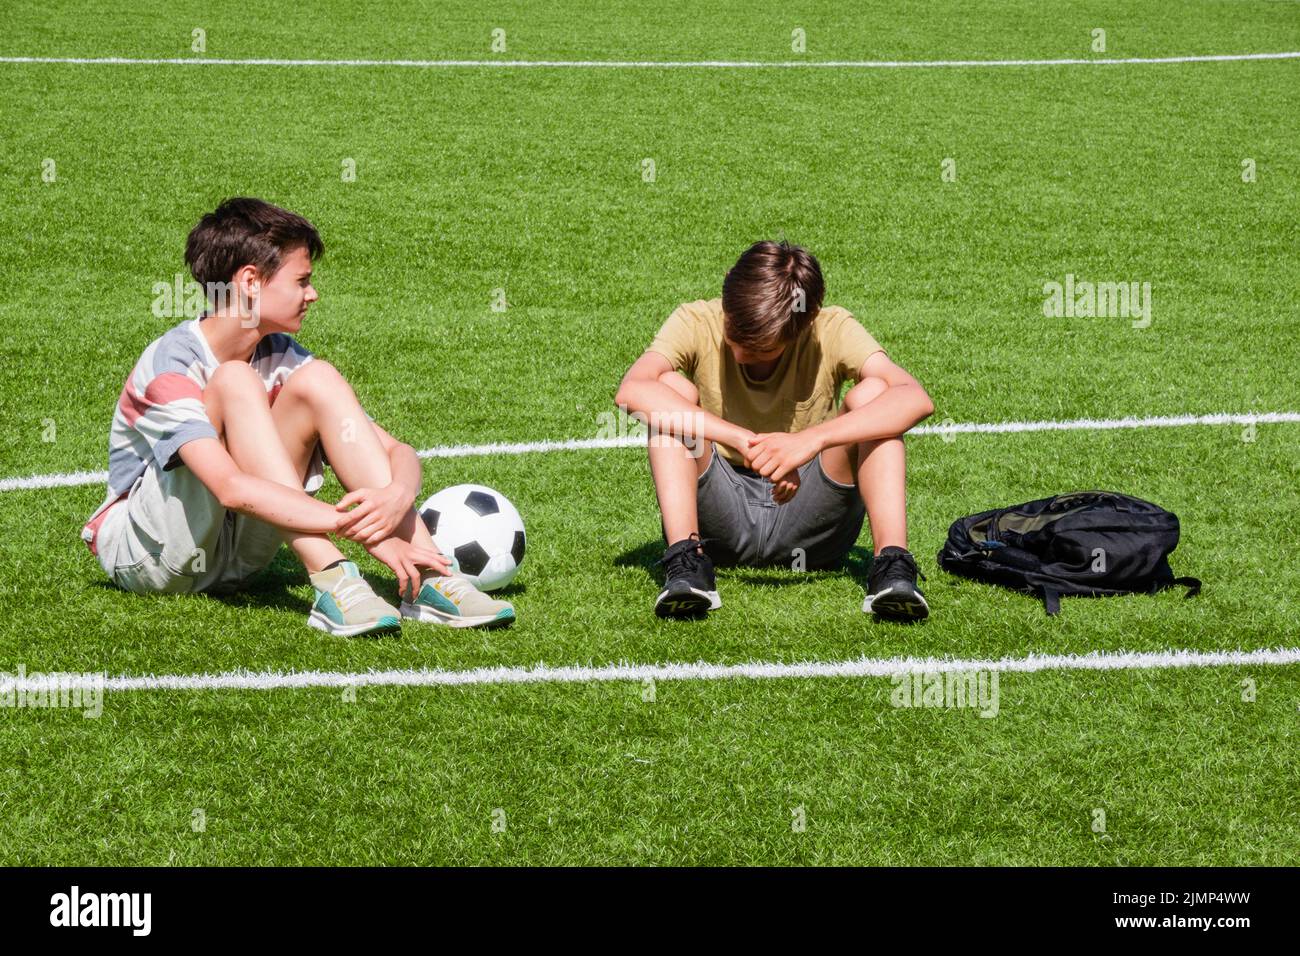 Children talking in school stadium outdoors. Teenage boy comforting consoling upset sad friend. Education, bullying, conflict, social relations Stock Photo